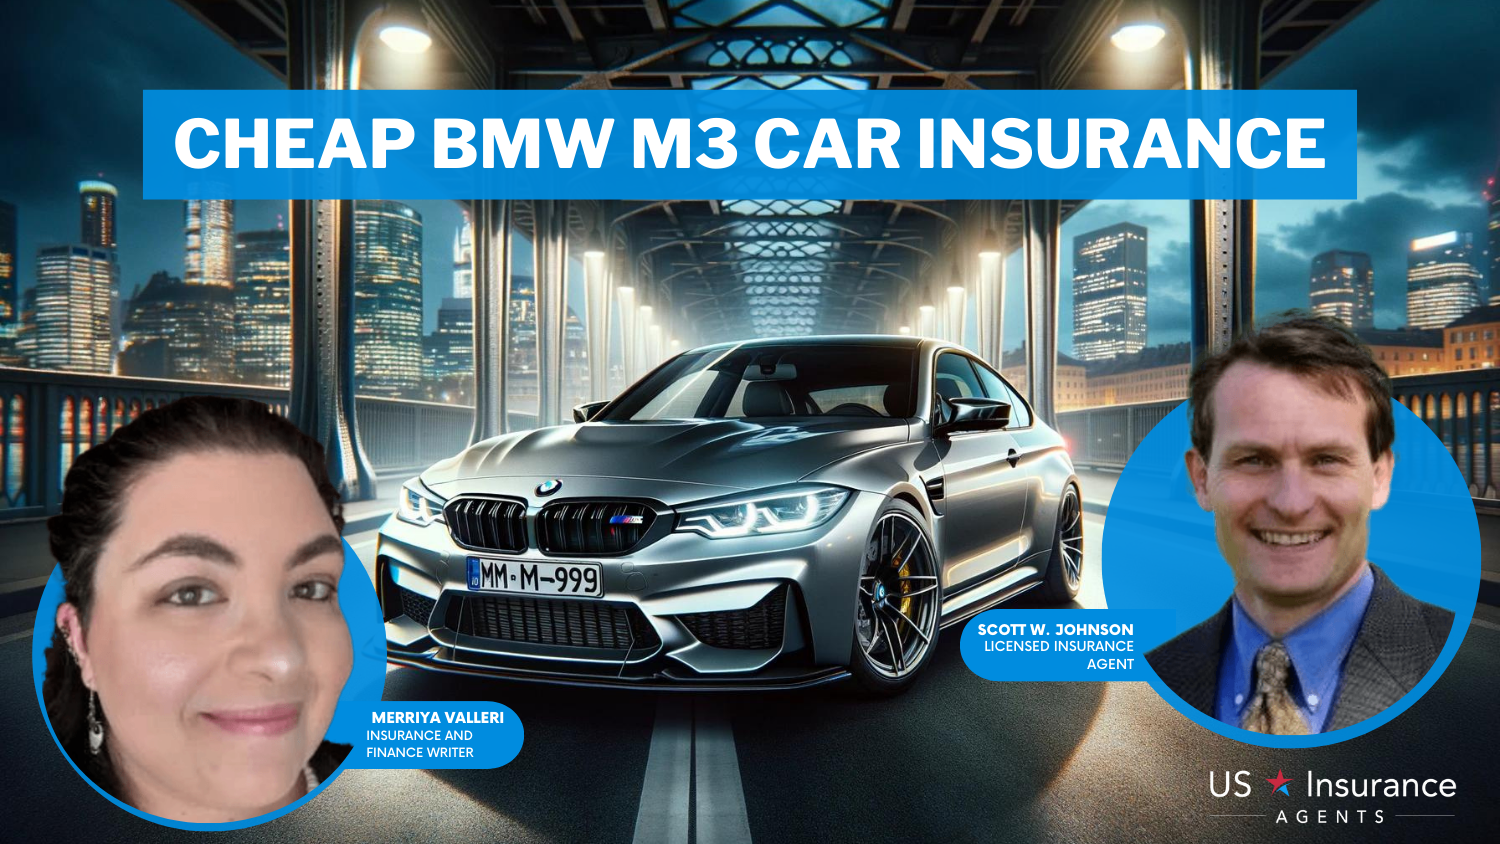 Cheap BMW M3 car insurance: AIG, ALLSTATE. and American Family